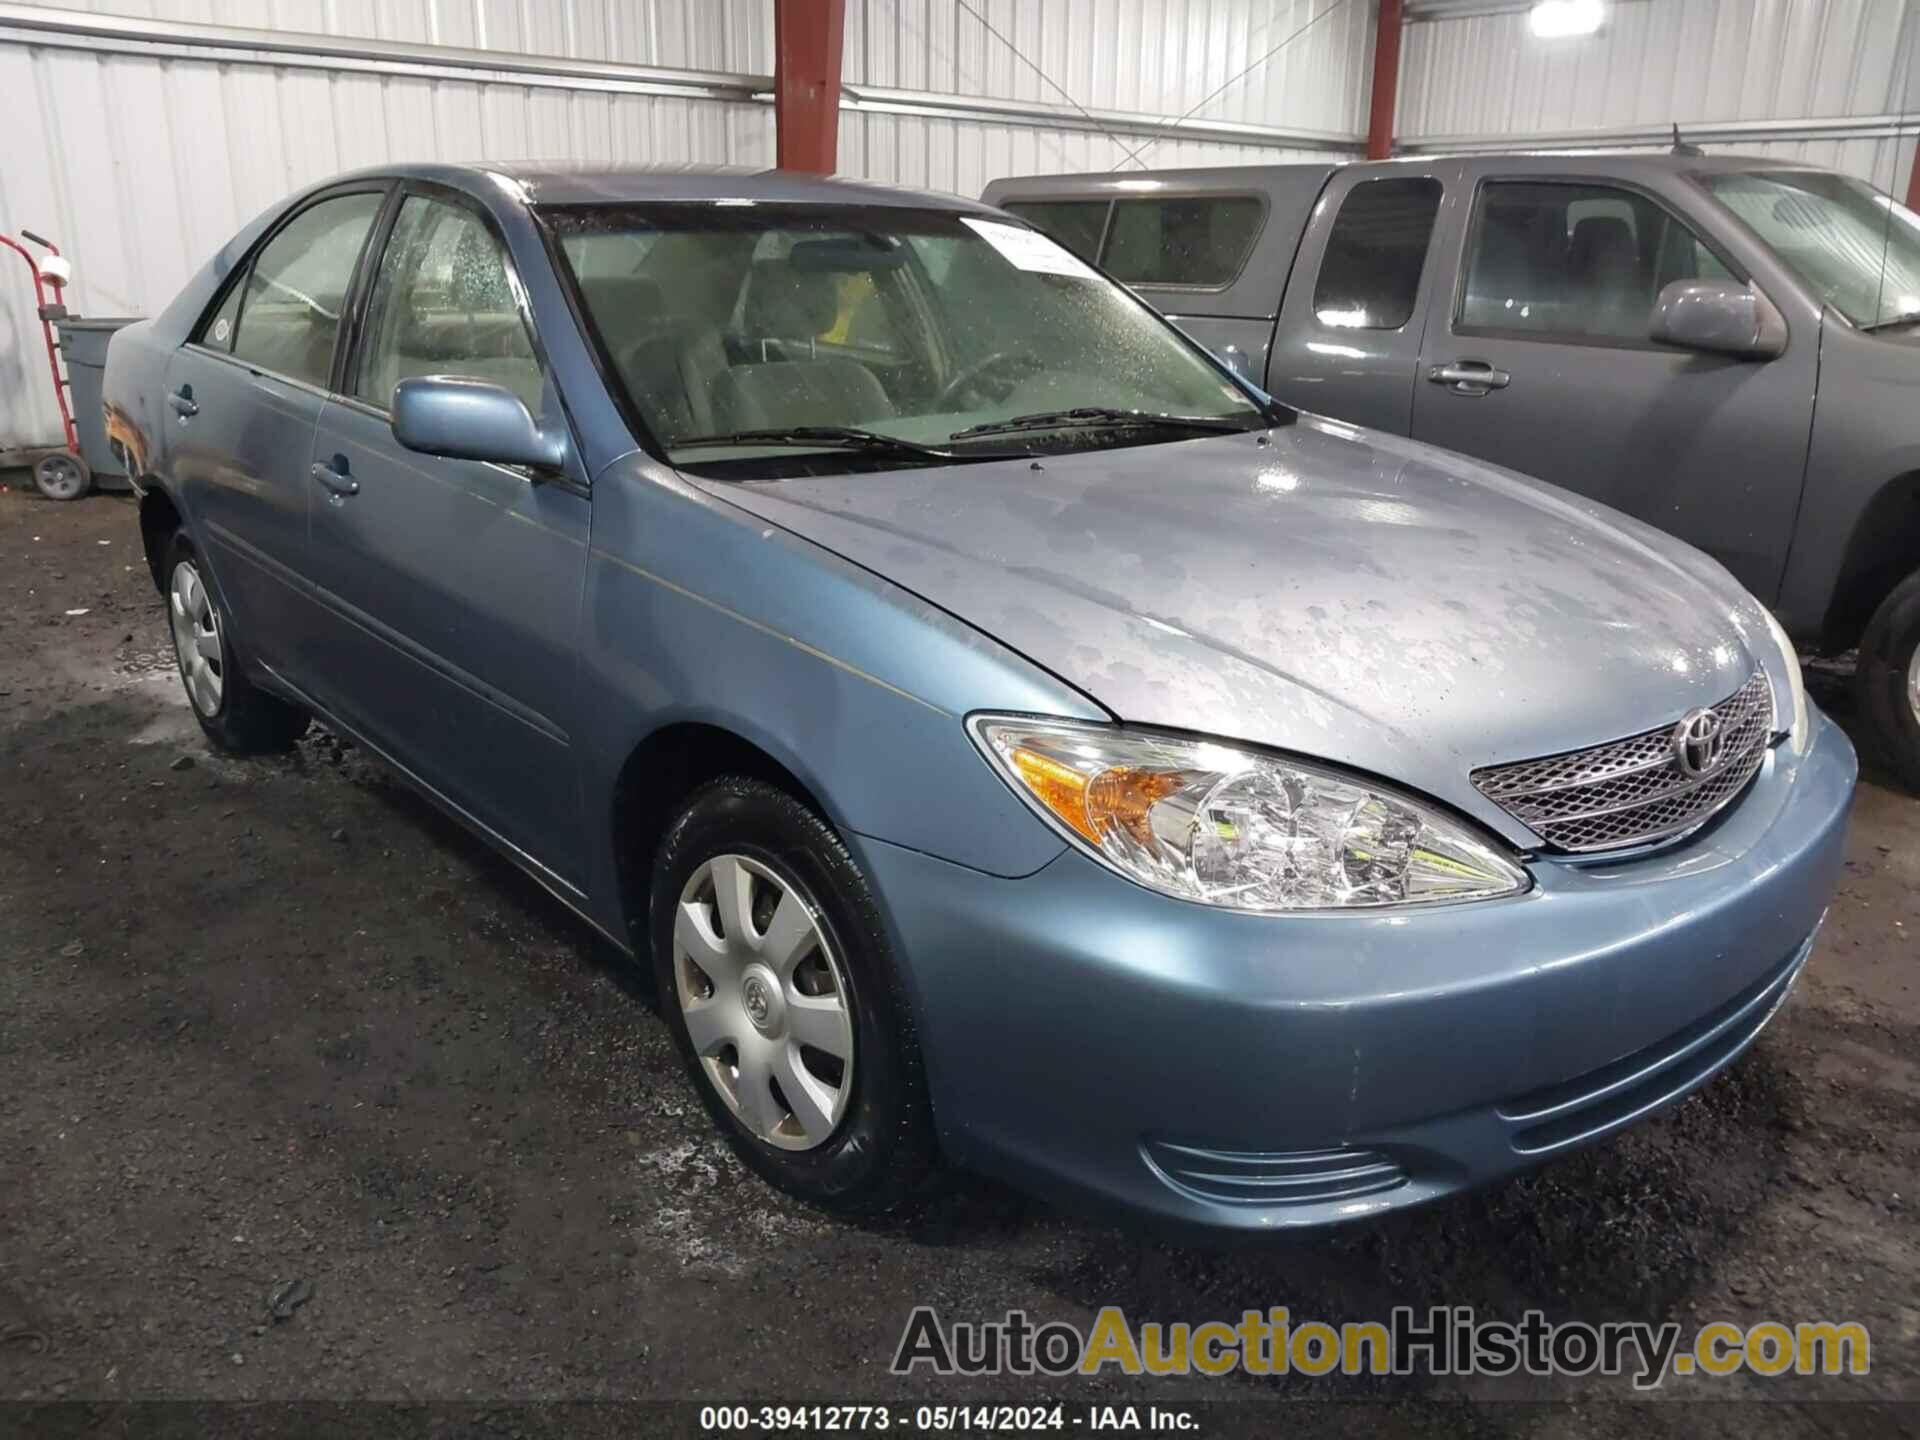 TOYOTA CAMRY LE, 4T1BE32K84U862144